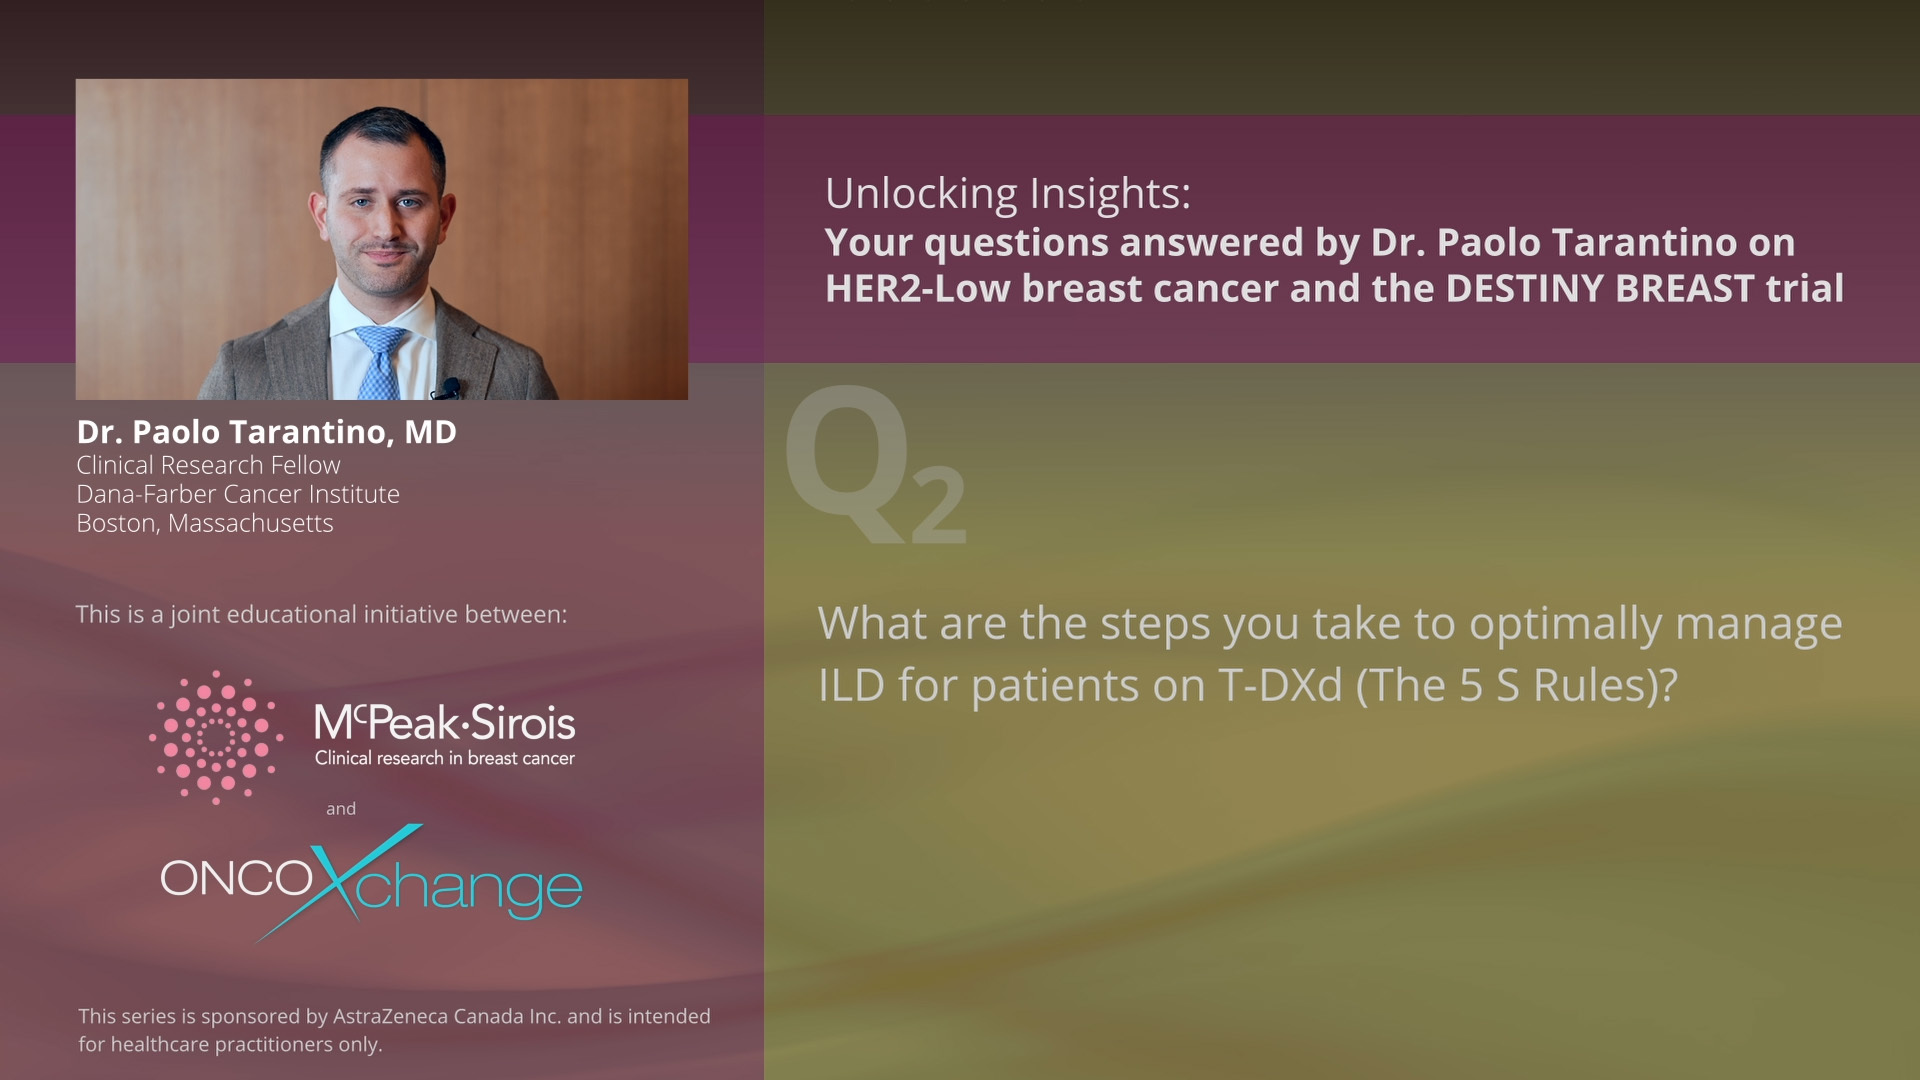 Q2: What are the steps you take to optimally manage ILD for patients on T-DXd (The 5 S Rules)?